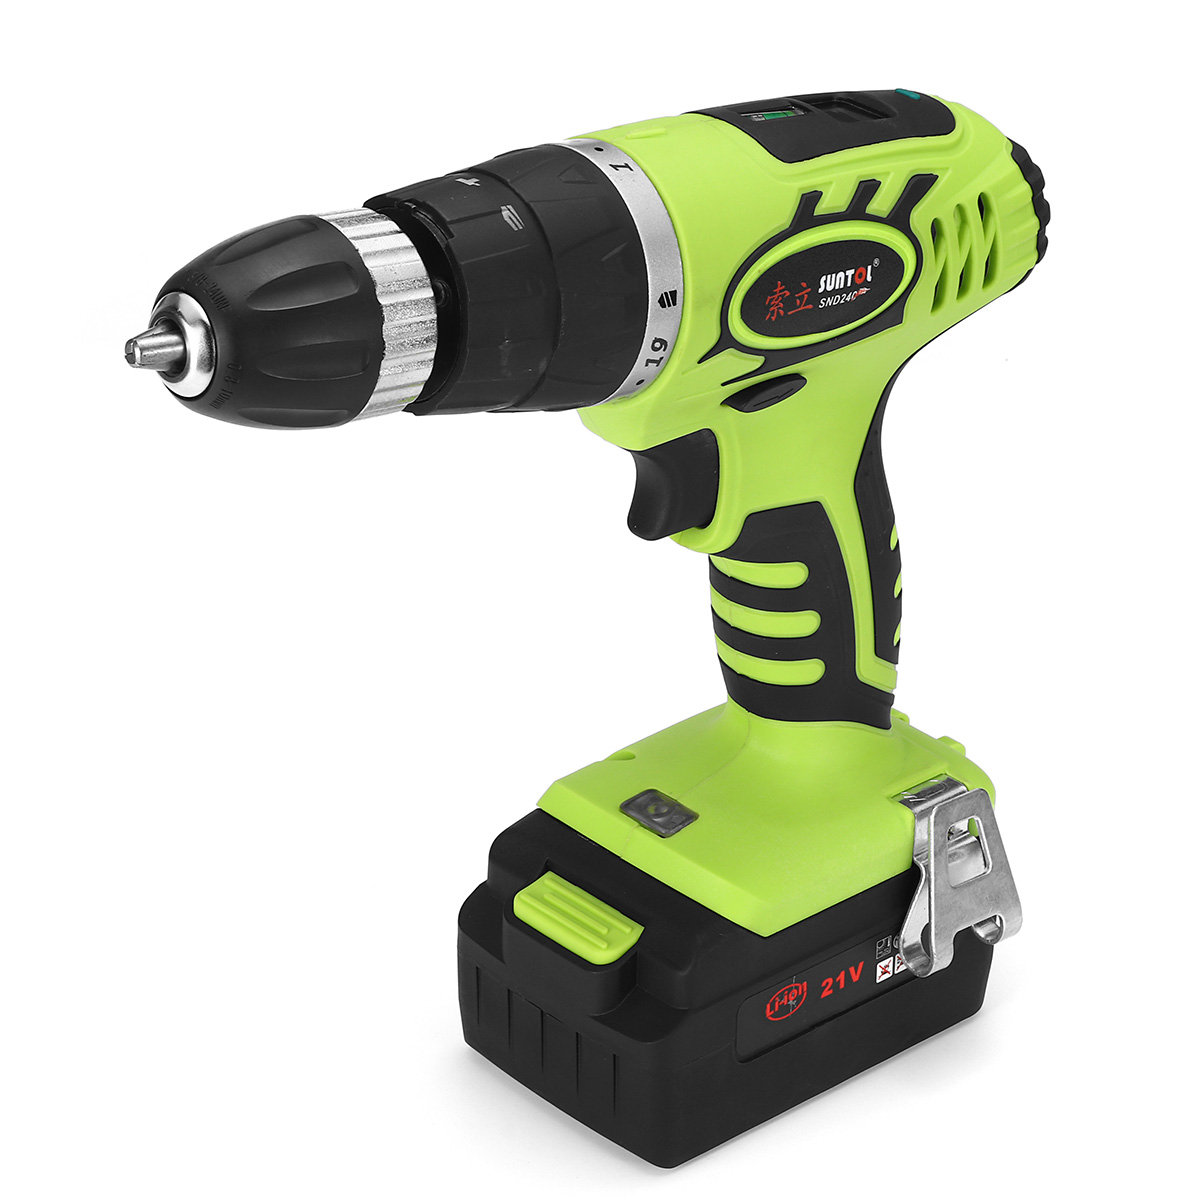 LCD Electricity Display Cordless Electric Screwdriver 1000mAh Li-ion Battery Power Drills With Accessories